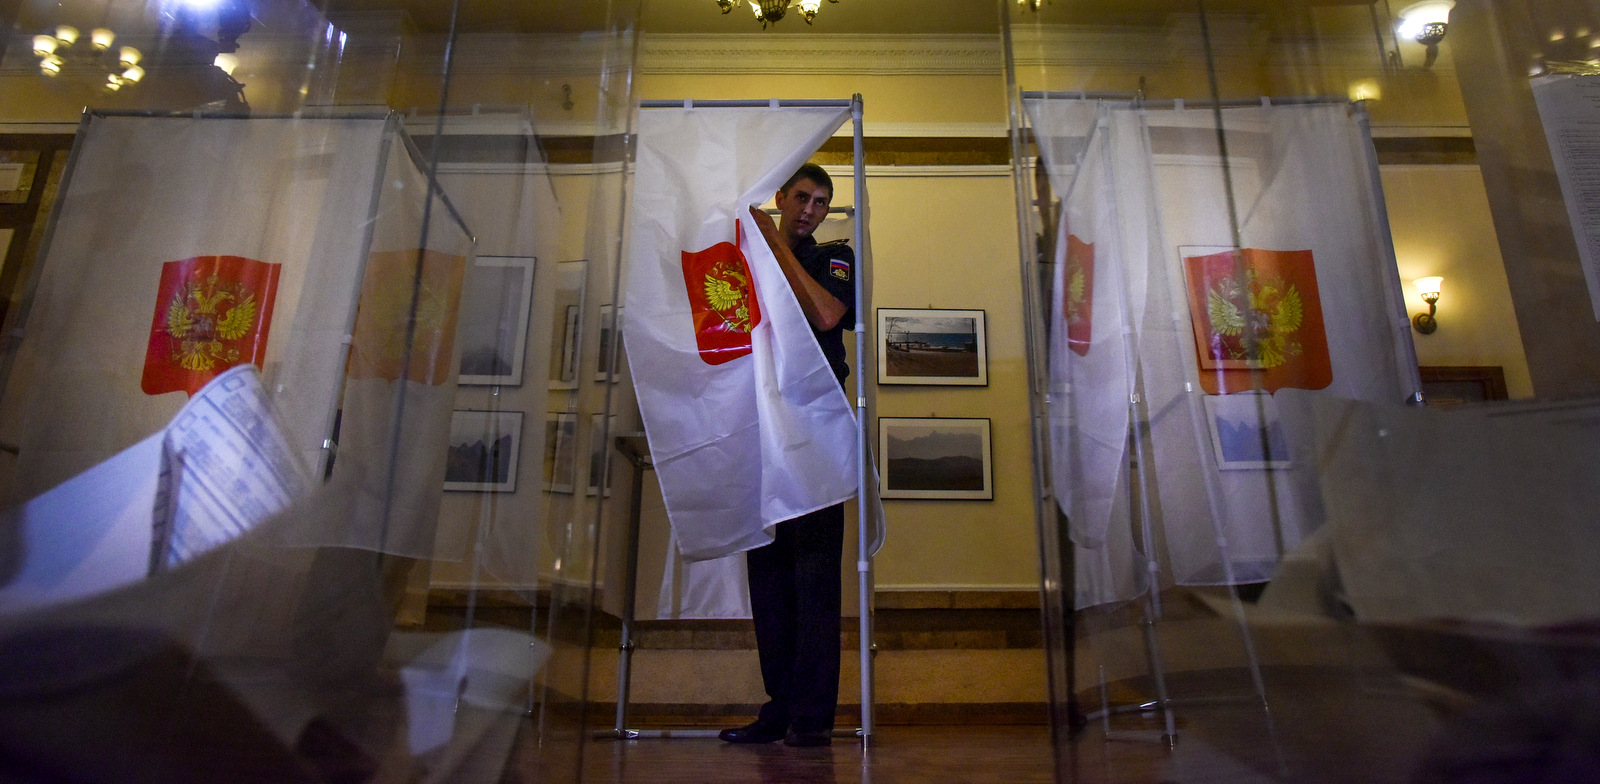 A Russian Black Sea fleet sailor leaves a polling booth to cast his ballot at a polling station during a Russian parliamentary elections in Sevastopol, Crimea, Sept. 18, 2016. (AP Photo/Maxin Voronov)